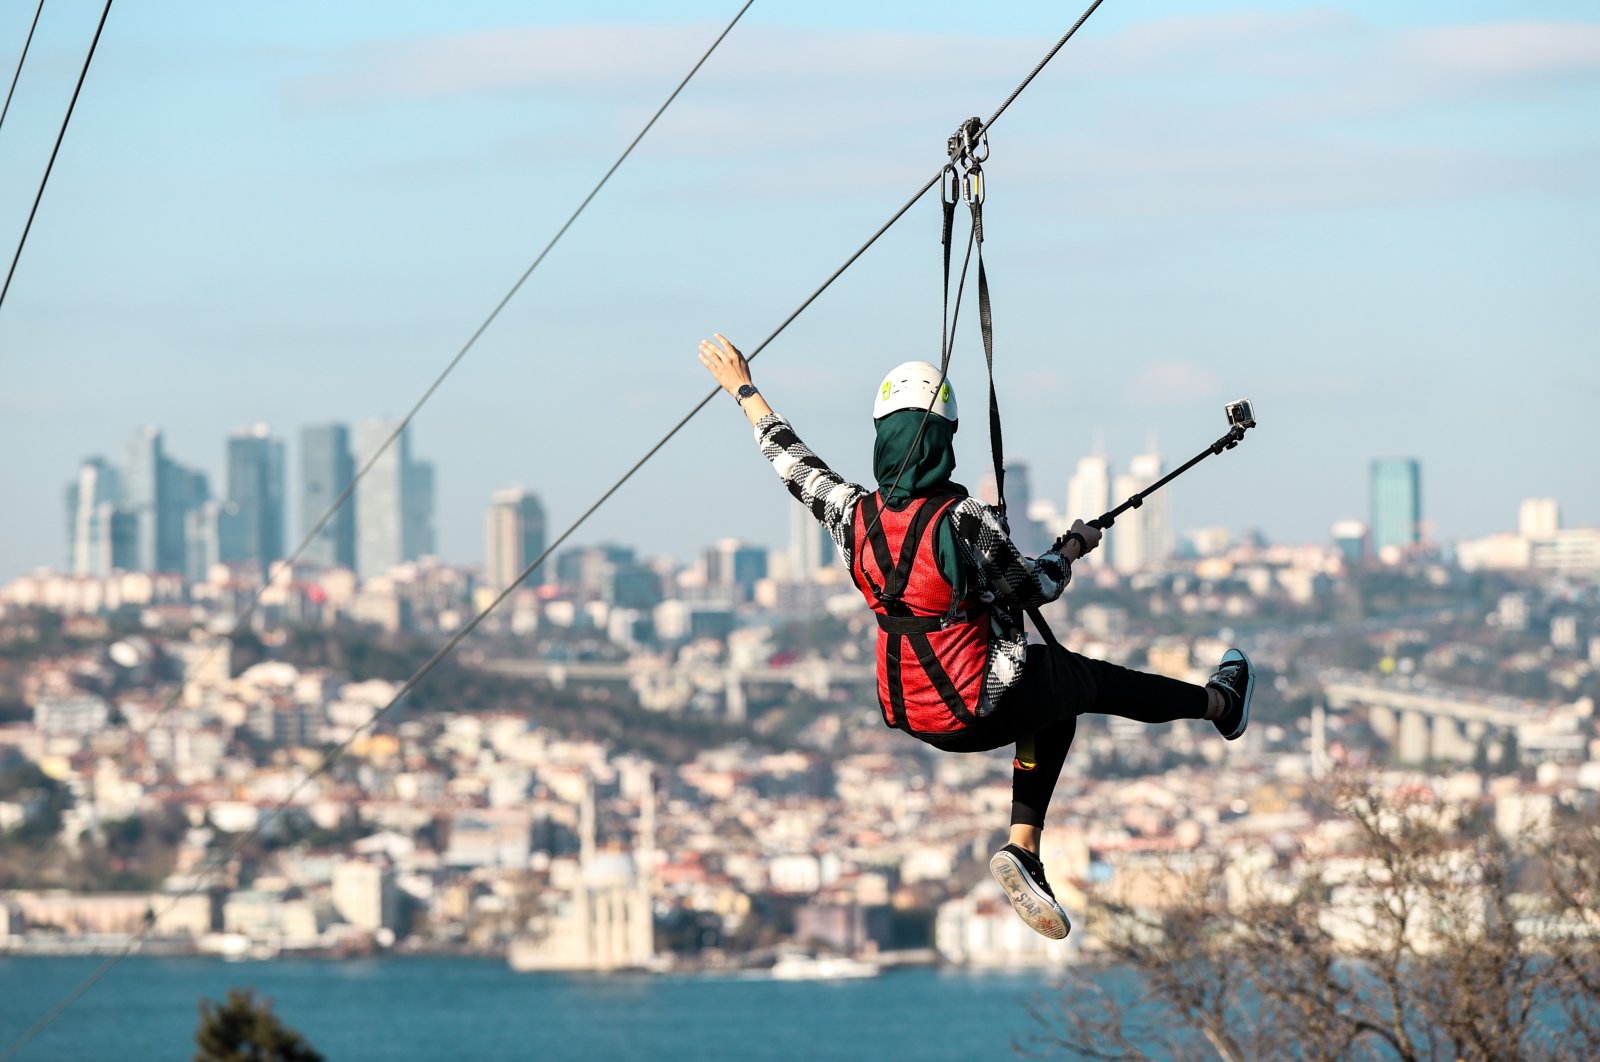 Adventure lovers in Istanbul can now feel their hearts race while ziplining and taking in a dazzling view of the Bosporus at the same time. (AA Photo)